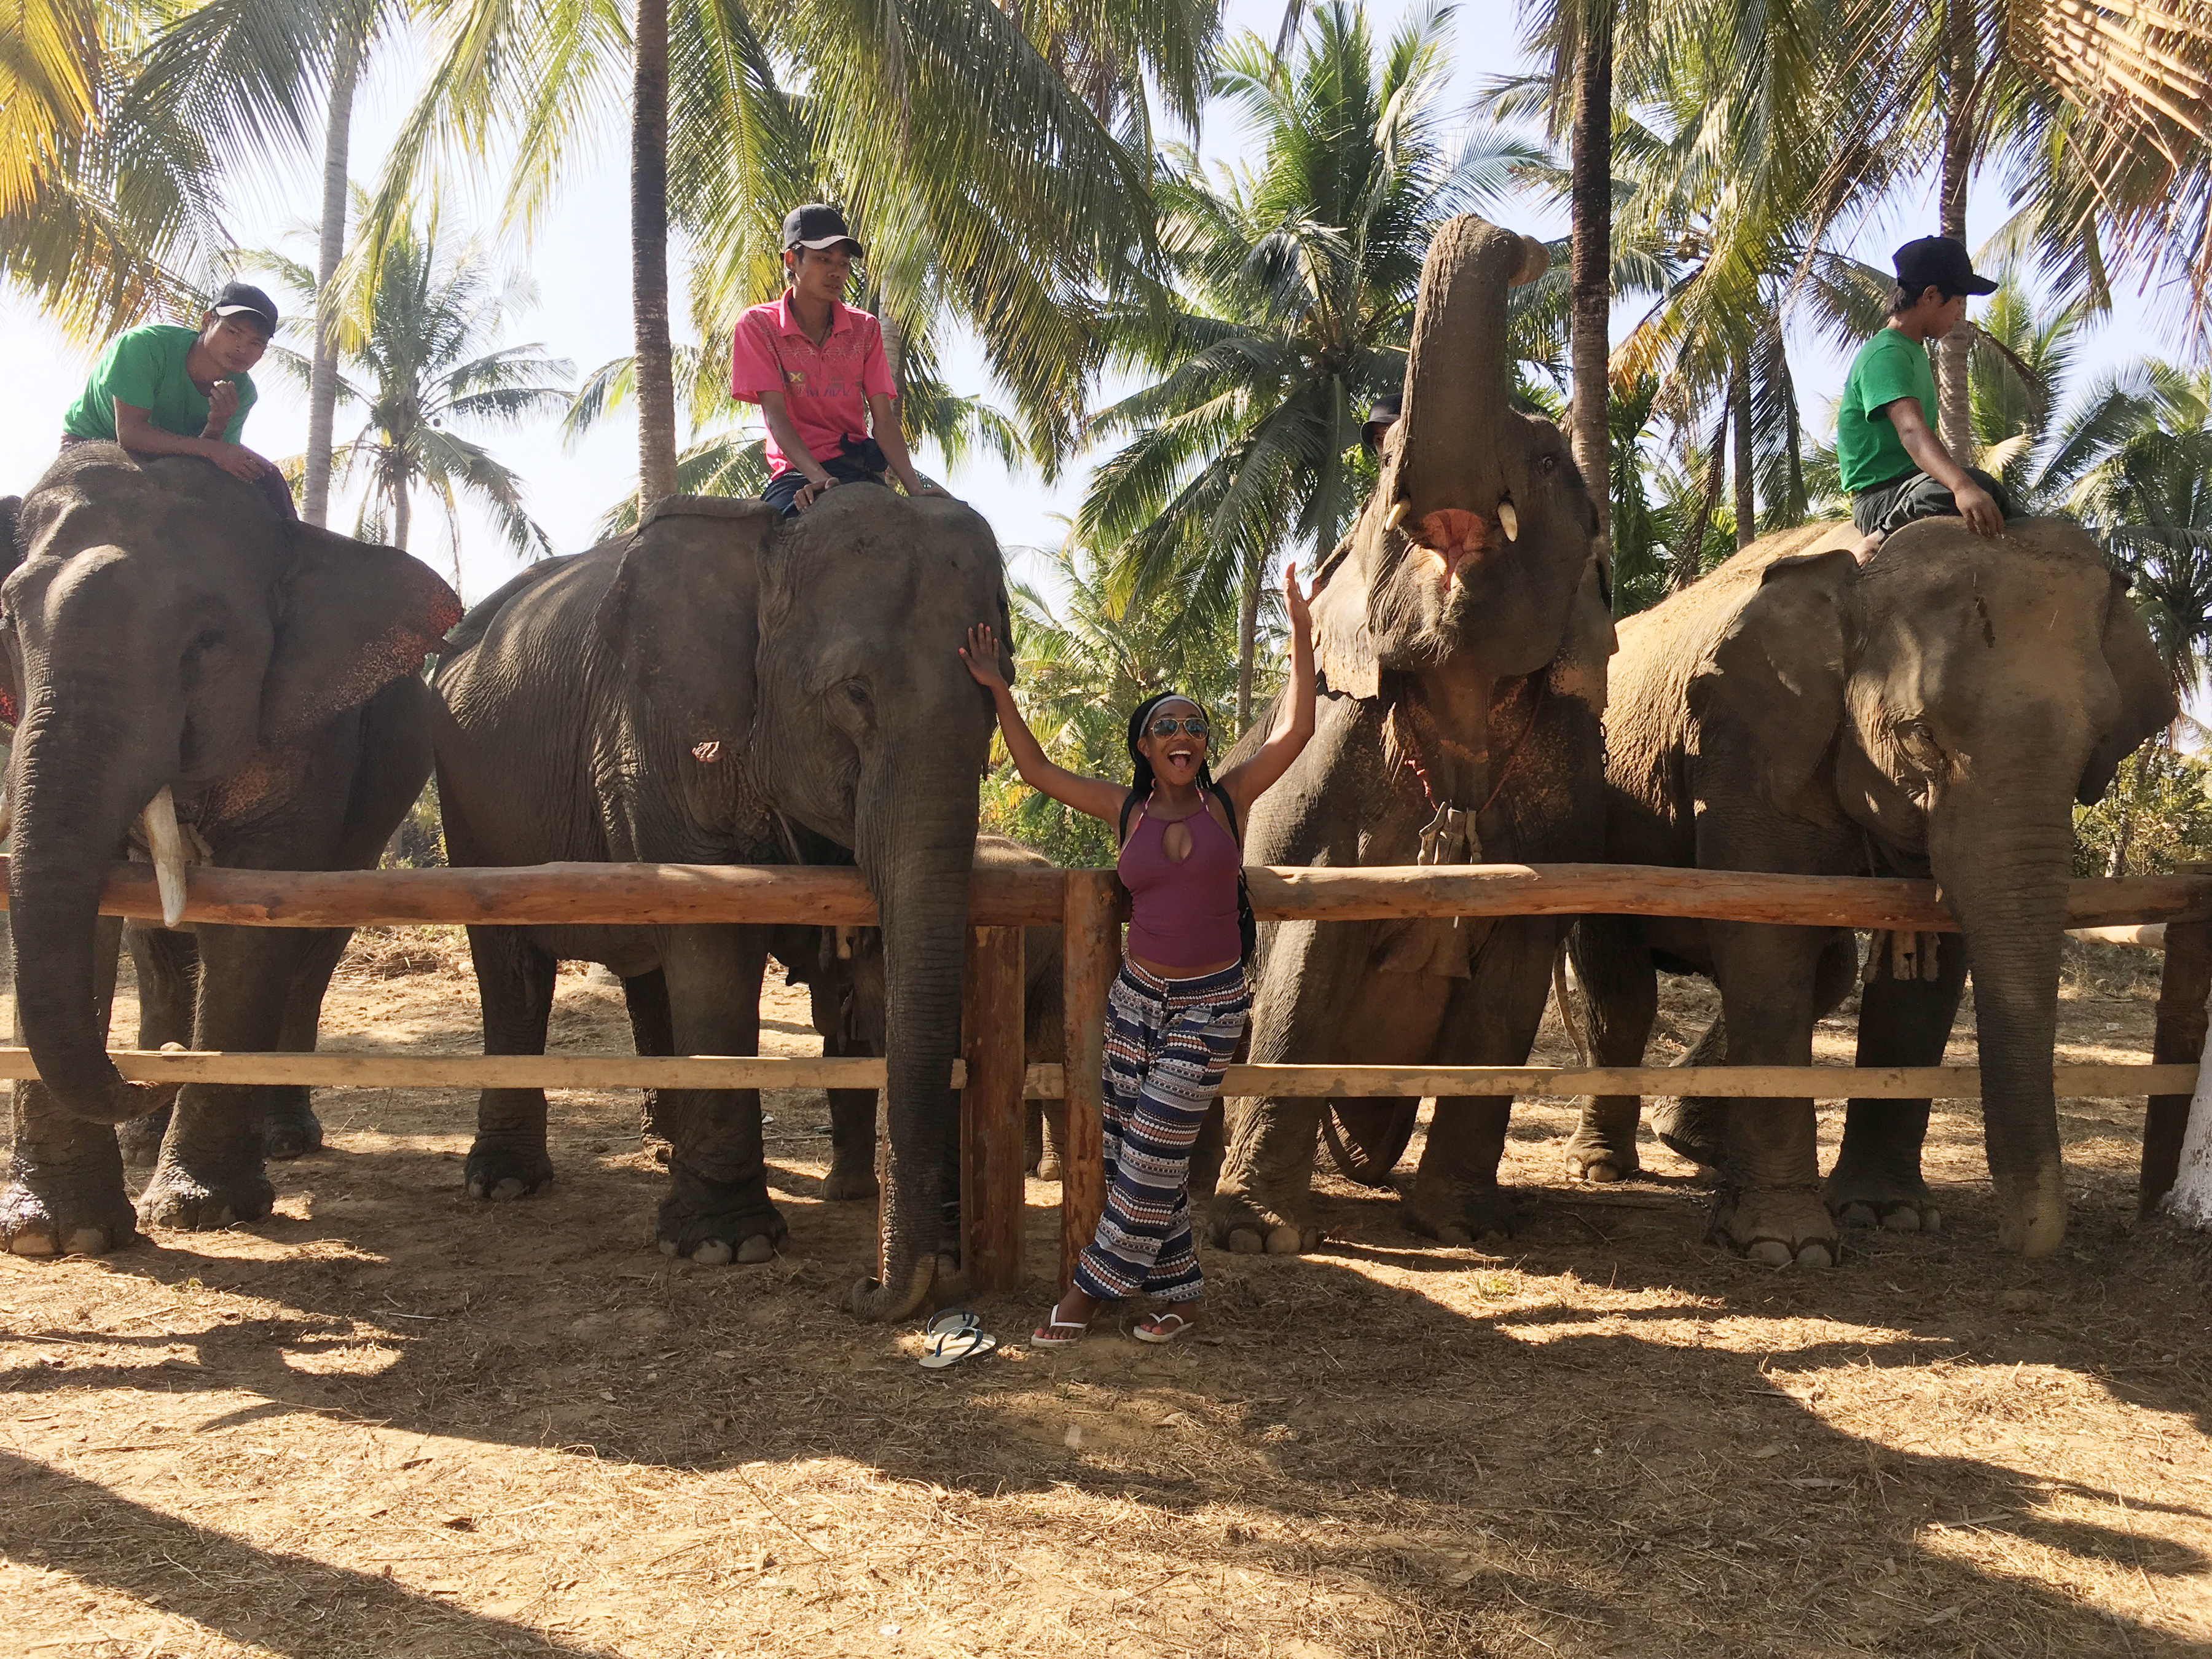 Not many students have an opportunity to take a break from classes and go hang out with elephants, but that is exactly what Deja Marsh did in the spring during her Semester at Sea study abroad experience.